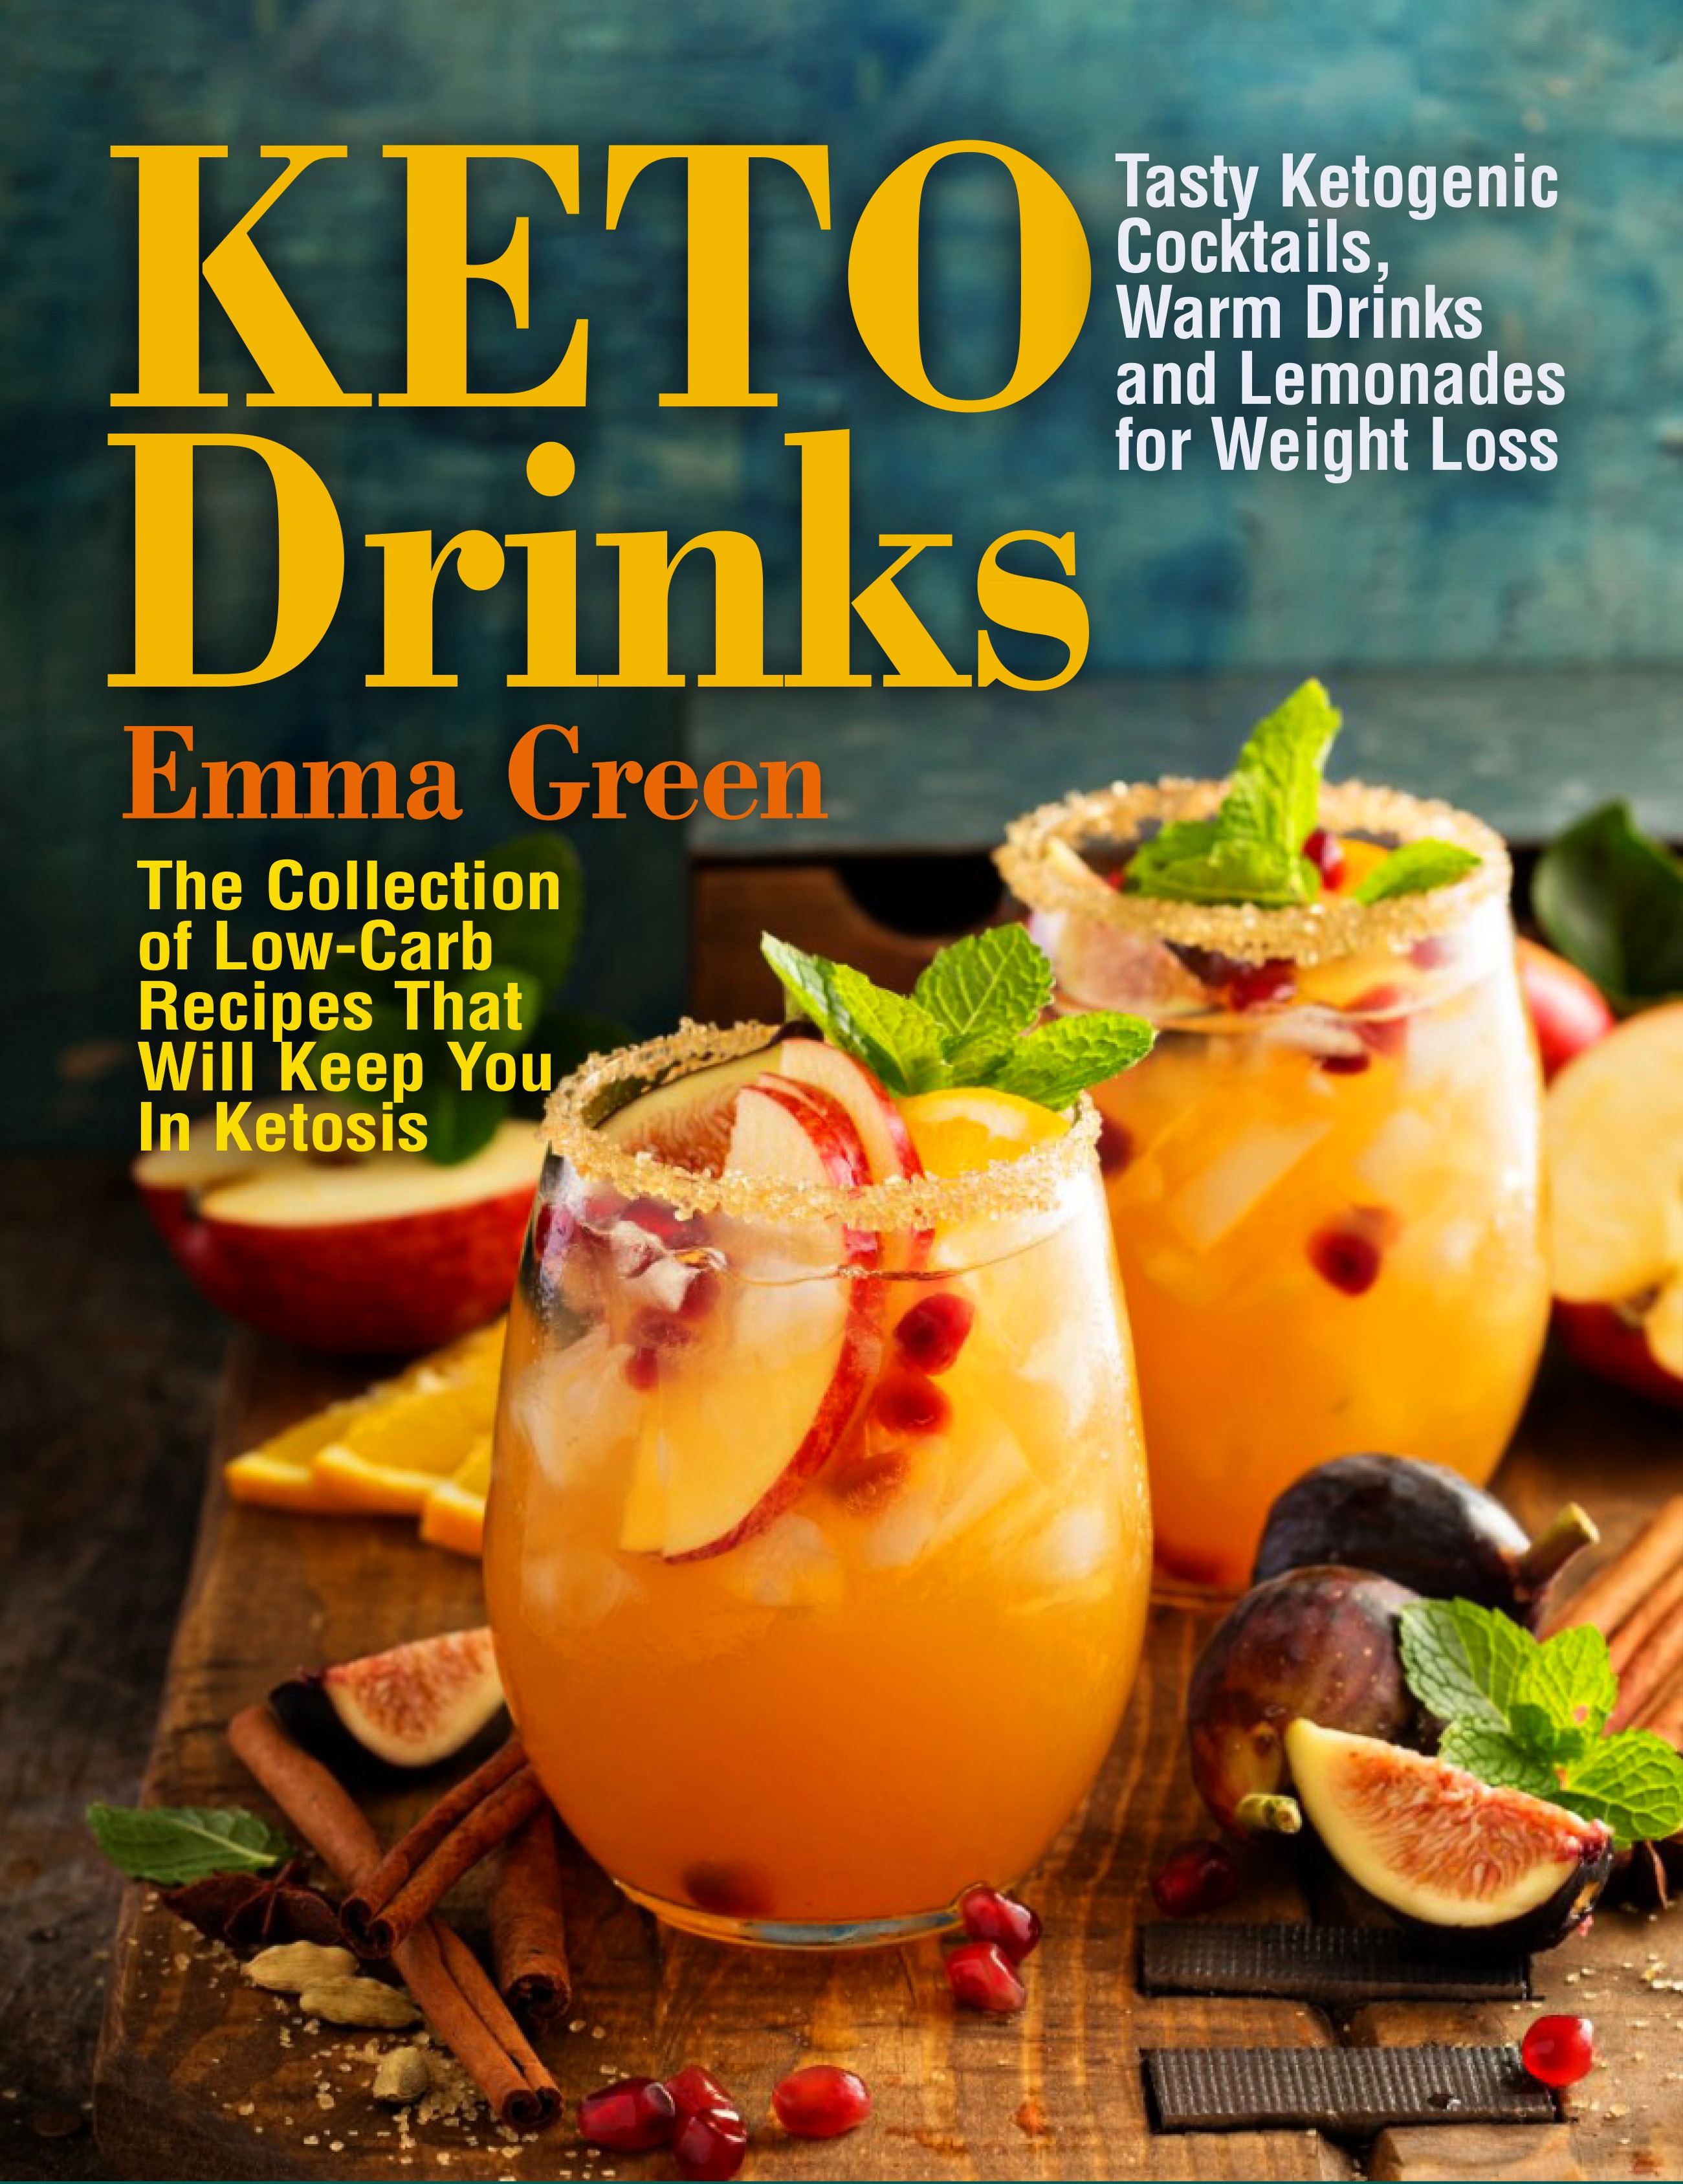 FREE: Keto Drinks: Tasty Ketogenic Cocktails, Warm Drinks and Lemonades for Weight Loss – The Collection of Low-Carb Recipes That Will Keep You In Ketosis by Emma Green